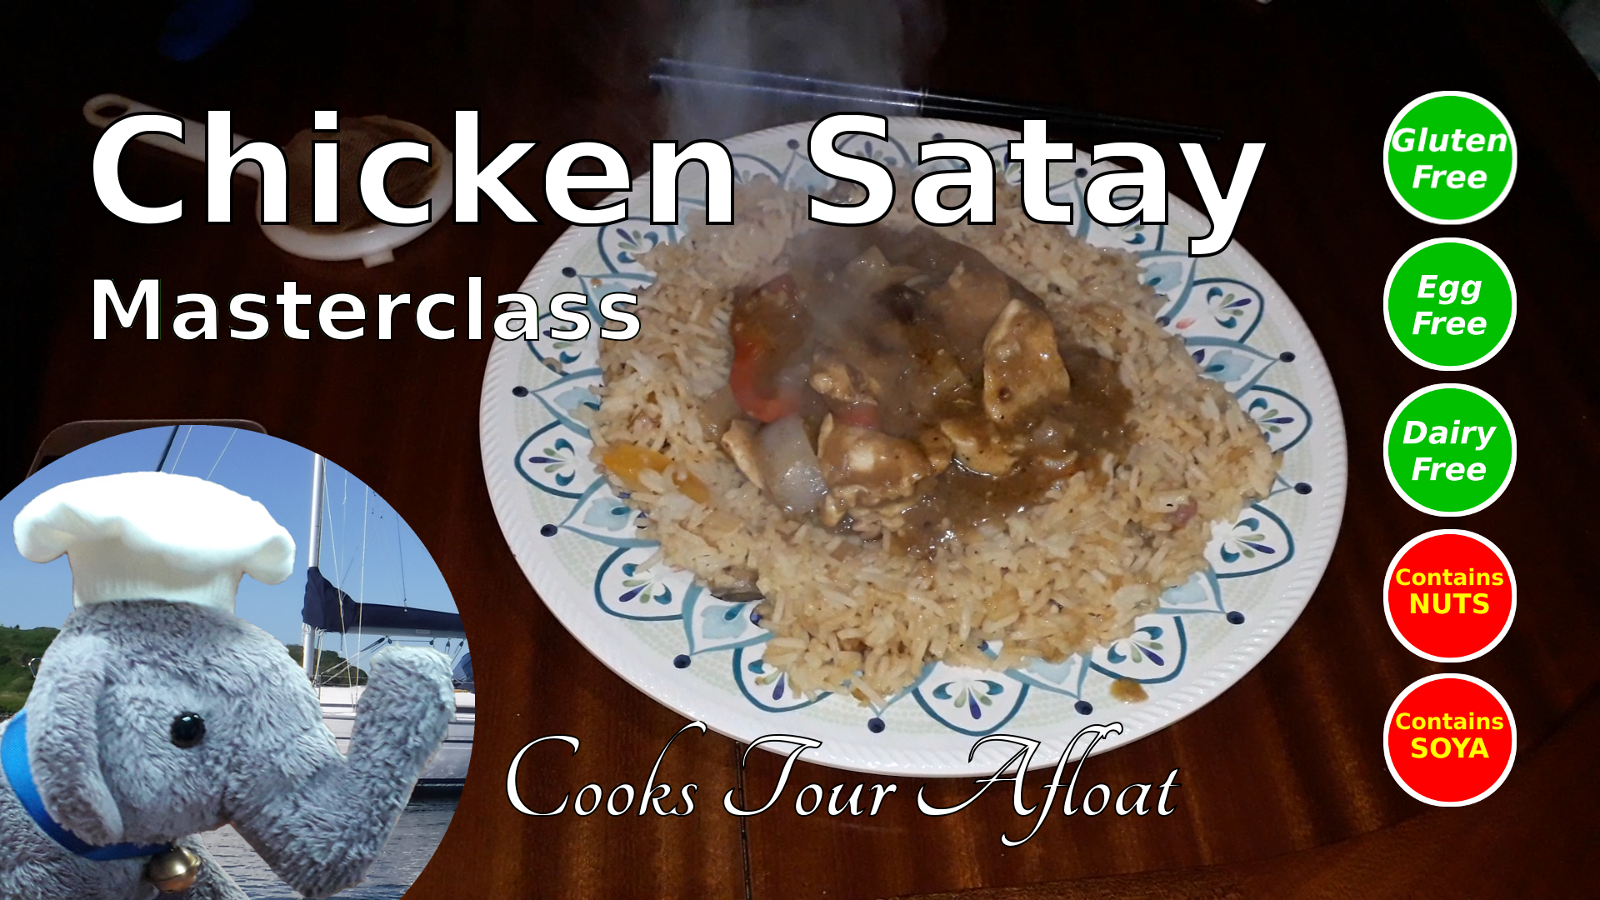 Watch our "Chicken Satay" video and add comments etc.